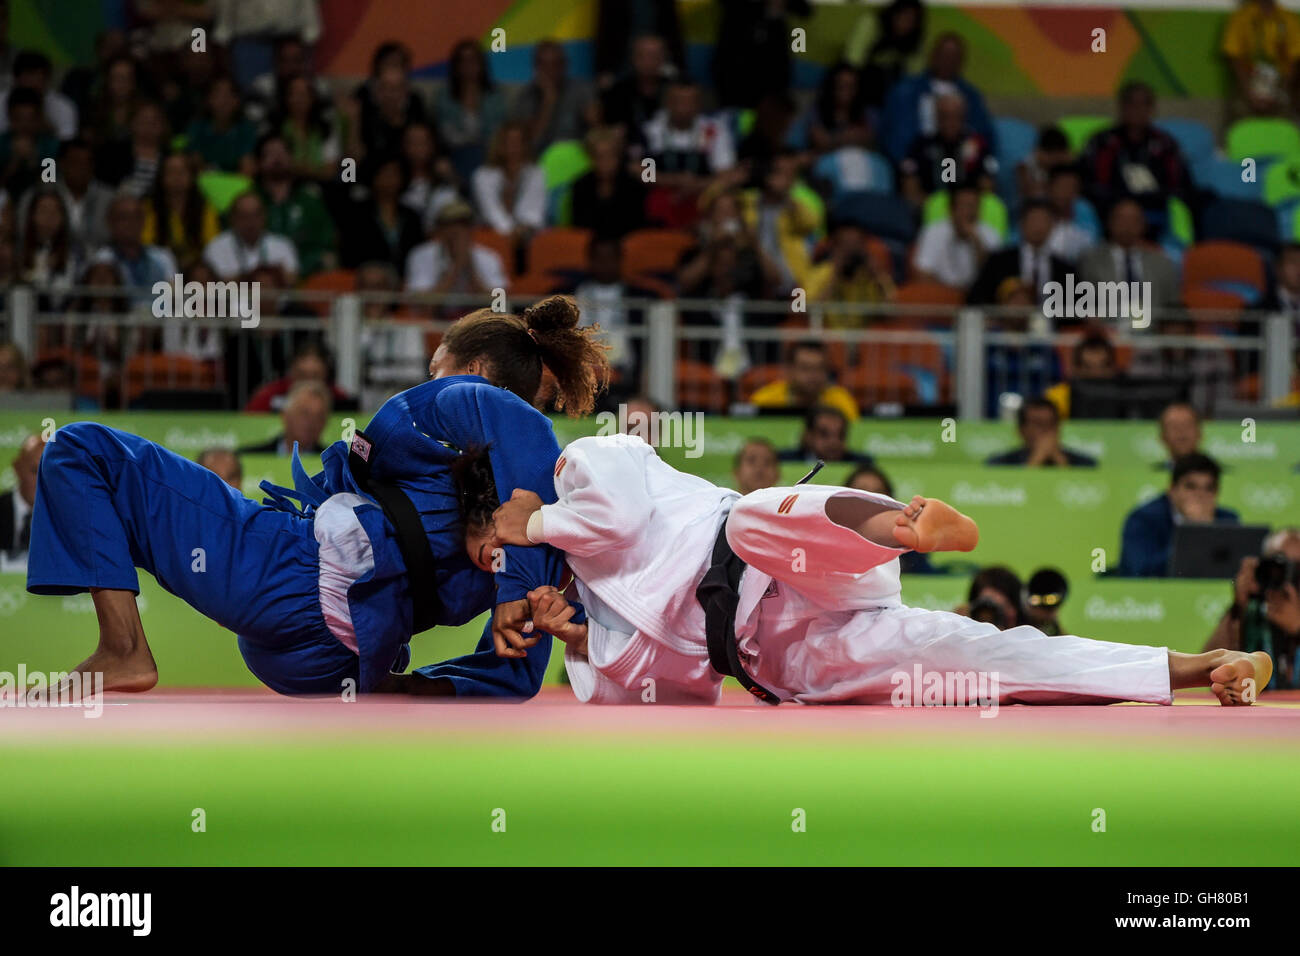 RIO DE JANEIRO, RJ - 08.08.2016: OLYMPICS 2016 JUDO - Sumiya Dorjsuren Mongolia (MGL) and Rafaela Silva of Brazil (BRA) in the gold dispute Judo up to 57 kg female Rio Olympics 2016 held in Carioca Arena 2. NOT AVAILABLE FOR LICENSING IN CHINA (Photo: Celso Pupo/Fotoarena) Stock Photo